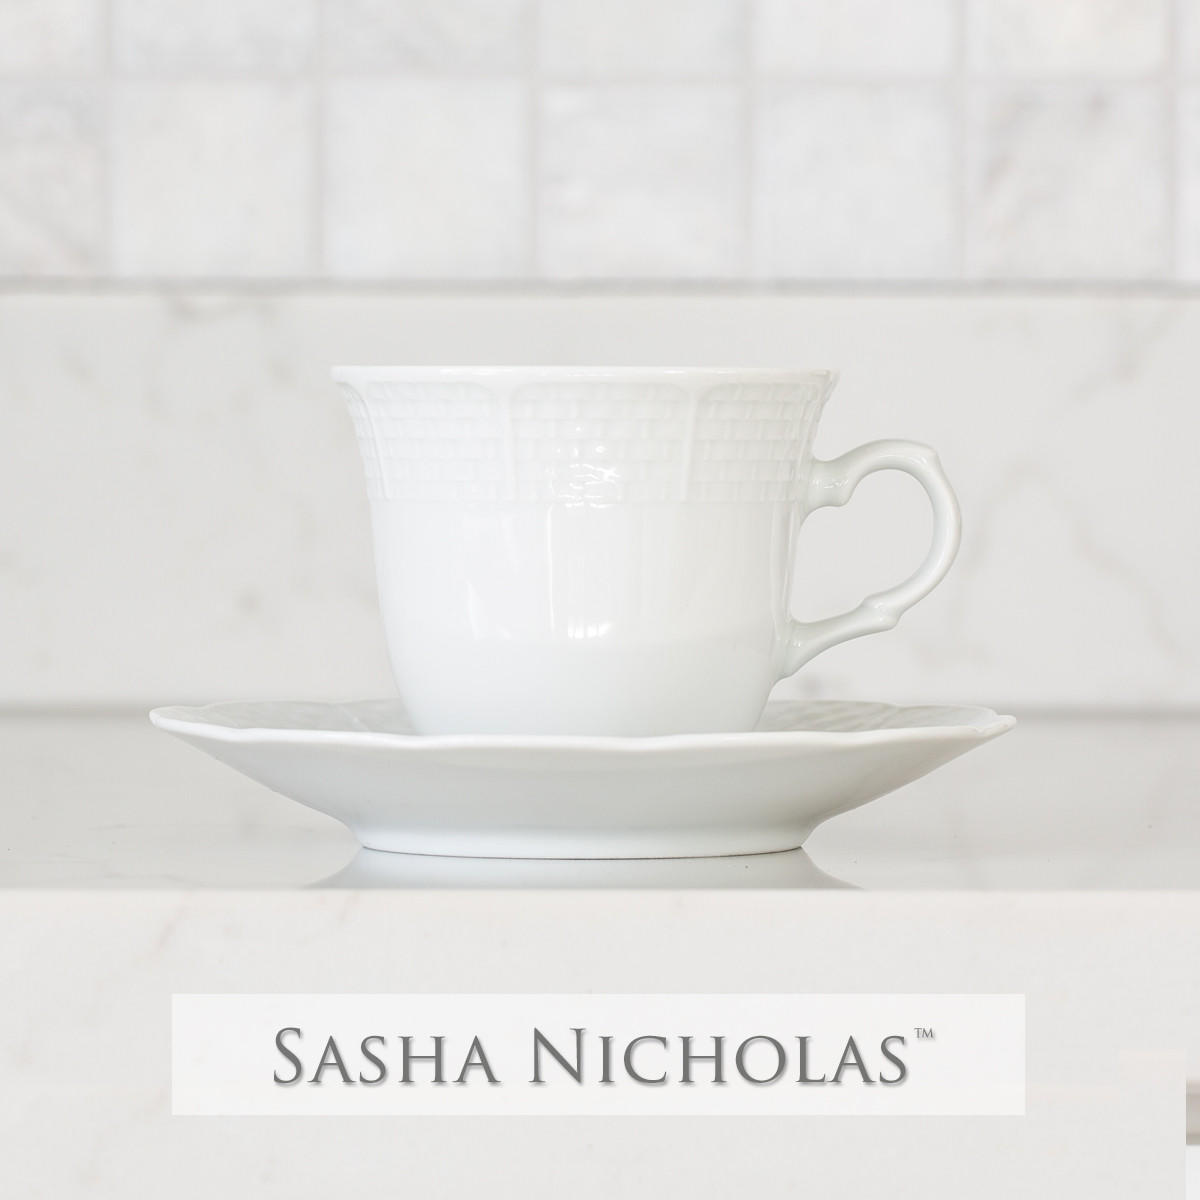 Parker-rushing Weave Cup+saucer Snw125, Parker-Rushing SNW125, Sasha Nicholas